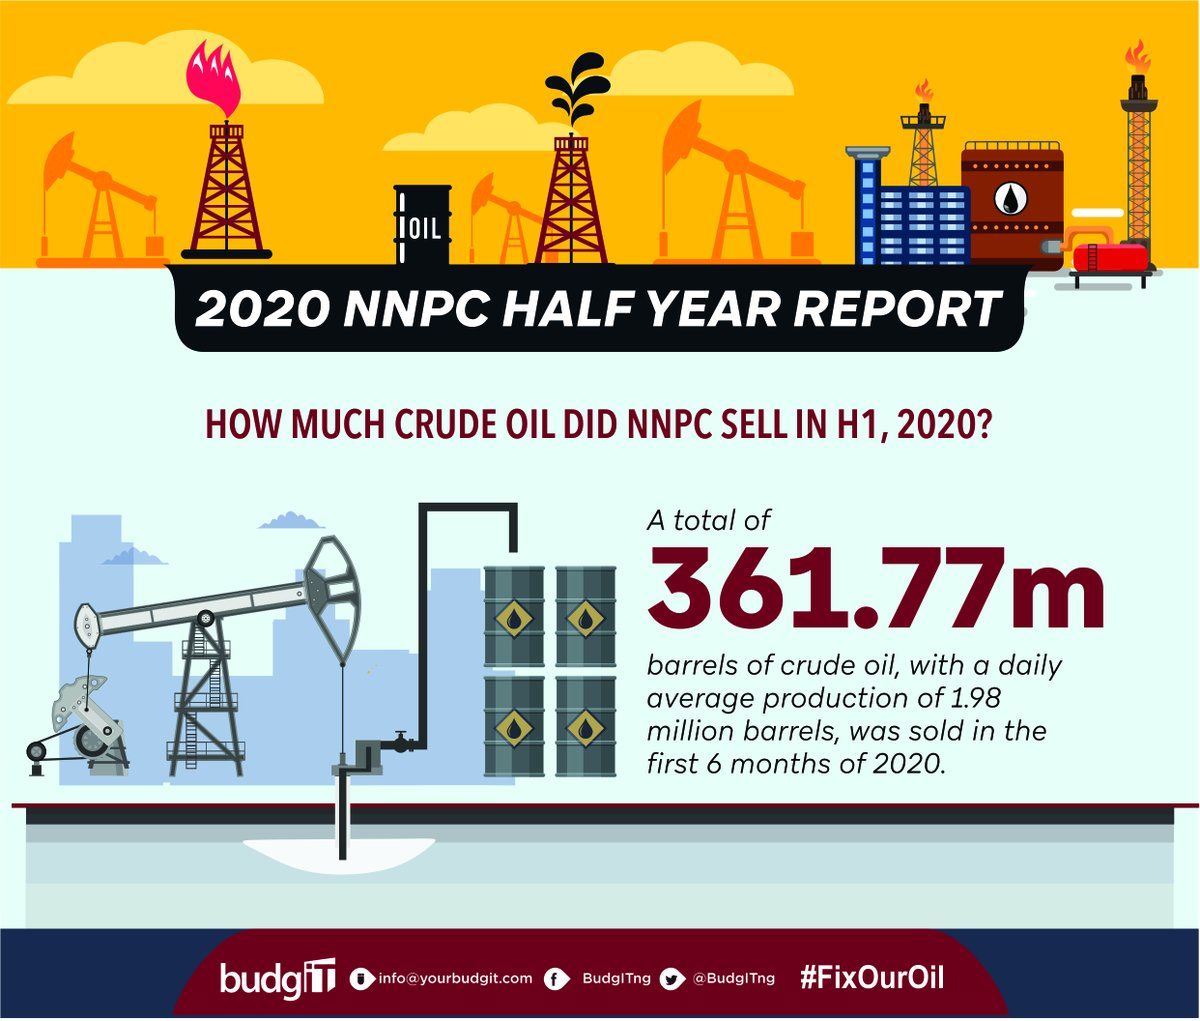 NNPC sold 361.77 million barrels of crude oil in H1 2020. The highest sales came from IOCs and Independent Sources with 63.08% of total sales. #FixOurOil